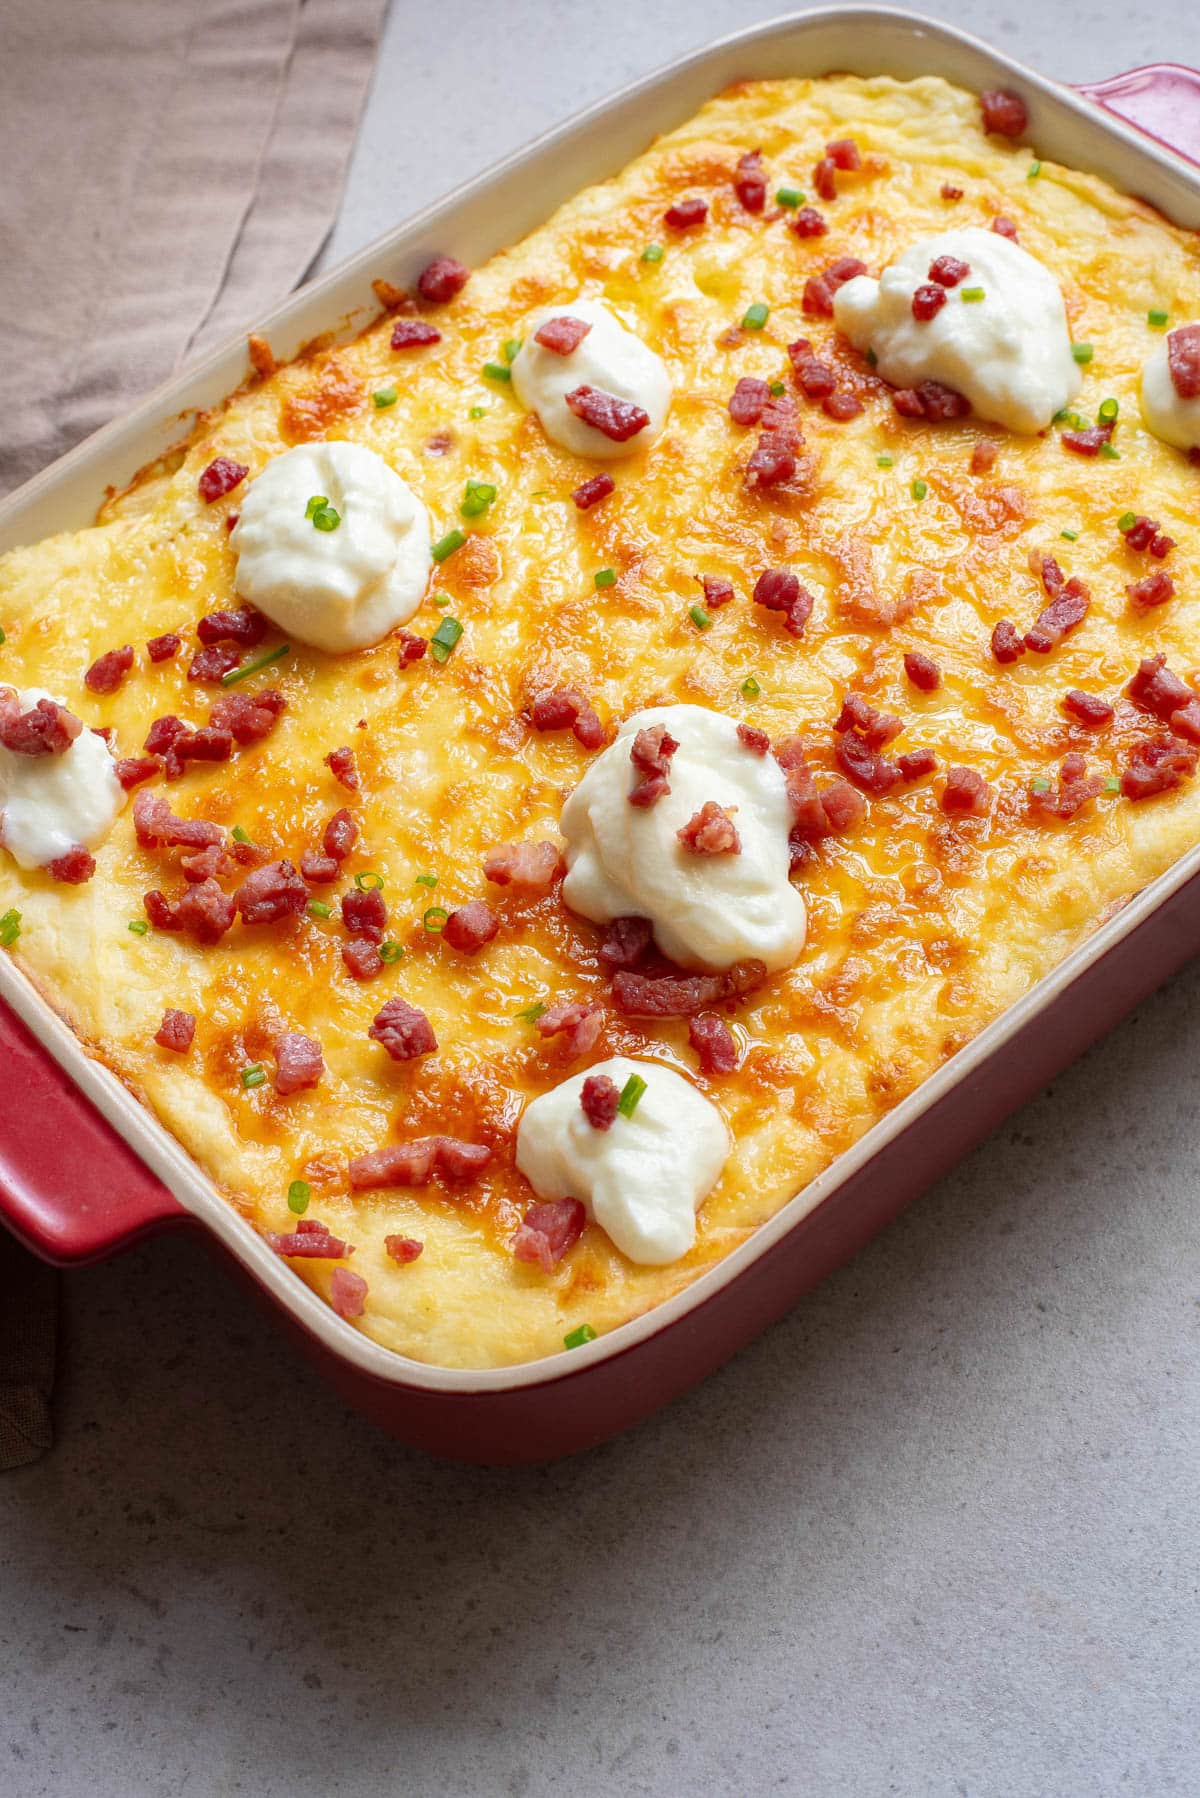 Potato casserole with bacon, cheese, and sour cream on top.